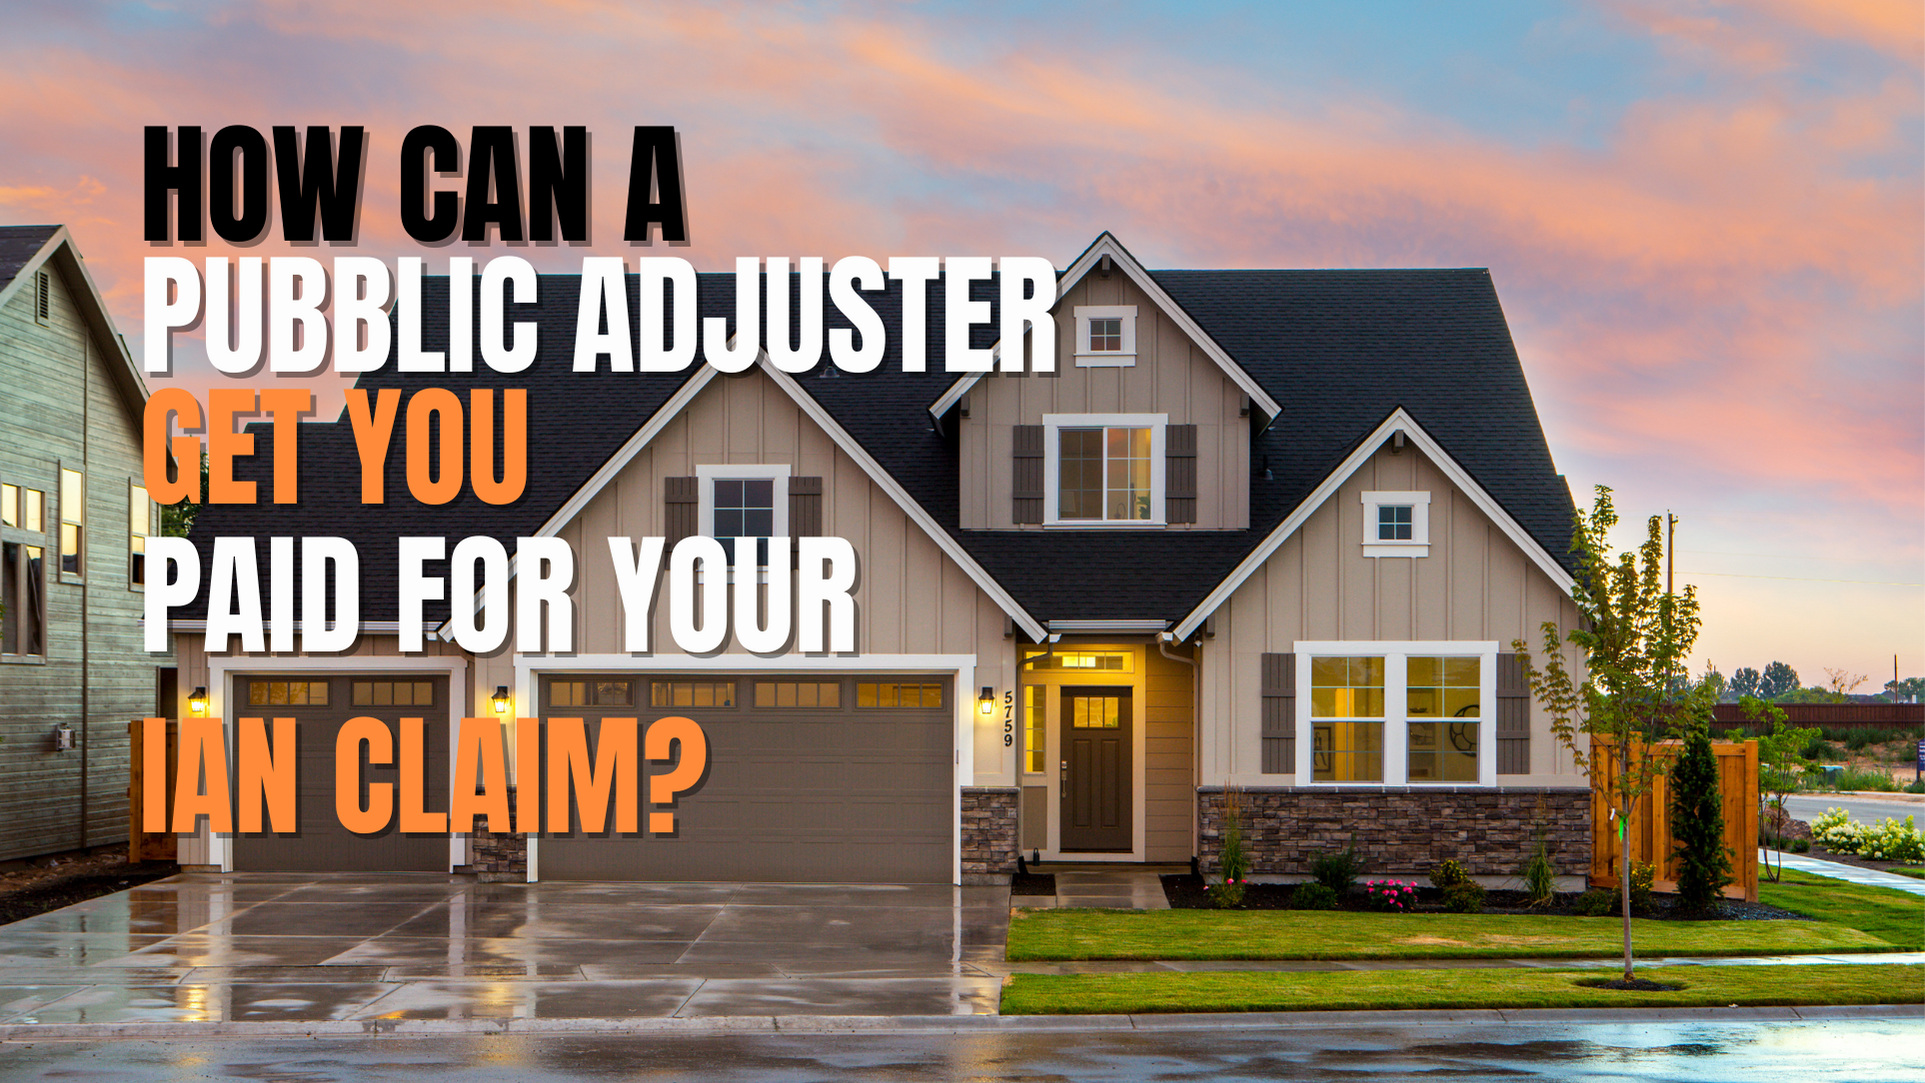 Insurance Underpaid? How can a Public Adjuster get you paid the most?